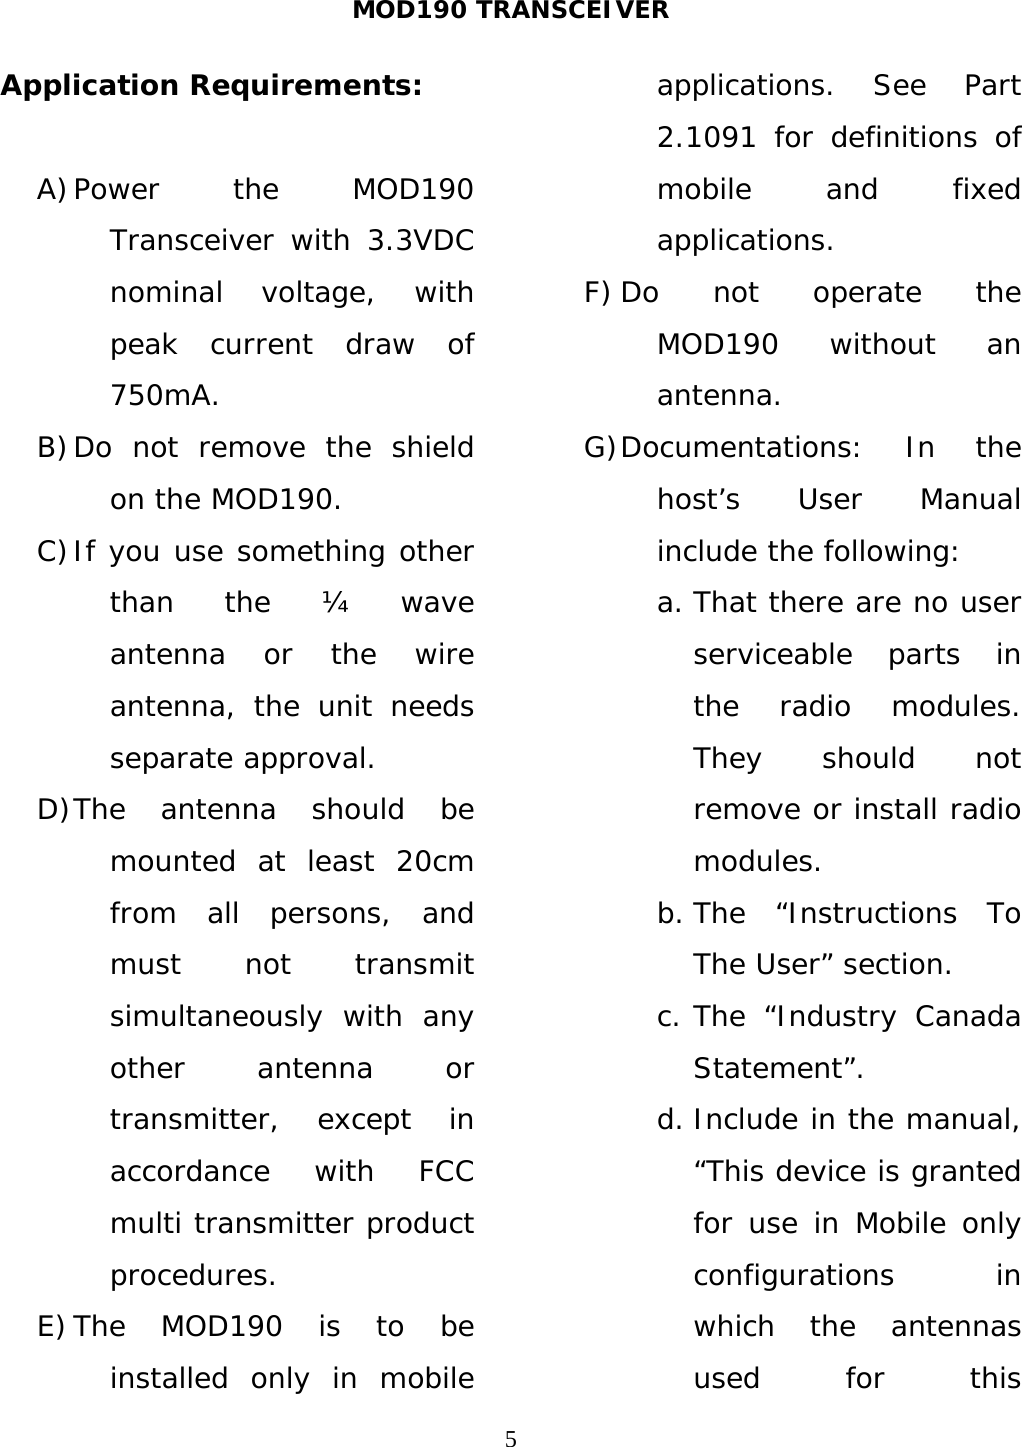 MOD190 TRANSCEIVER  5Application Requirements:  A) Power the MOD190 Transceiver with 3.3VDC nominal voltage, with peak current draw of 750mA. B) Do not remove the shield on the MOD190. C) If you use something other than the ¼ wave antenna or the wire antenna, the unit needs separate approval. D) The antenna should be mounted at least 20cm from all persons, and must not transmit simultaneously with any other antenna or transmitter, except in accordance with FCC multi transmitter product procedures. E) The MOD190 is to be installed only in mobile applications. See Part 2.1091 for definitions of mobile and fixed applications. F) Do not operate the MOD190 without an antenna. G) Documentations: In the host’s User Manual include the following: a. That there are no user serviceable parts in the radio modules. They should not remove or install radio modules. b. The “Instructions To The User” section. c. The “Industry Canada Statement”. d. Include in the manual, “This device is granted for use in Mobile only configurations in which the antennas used for this 